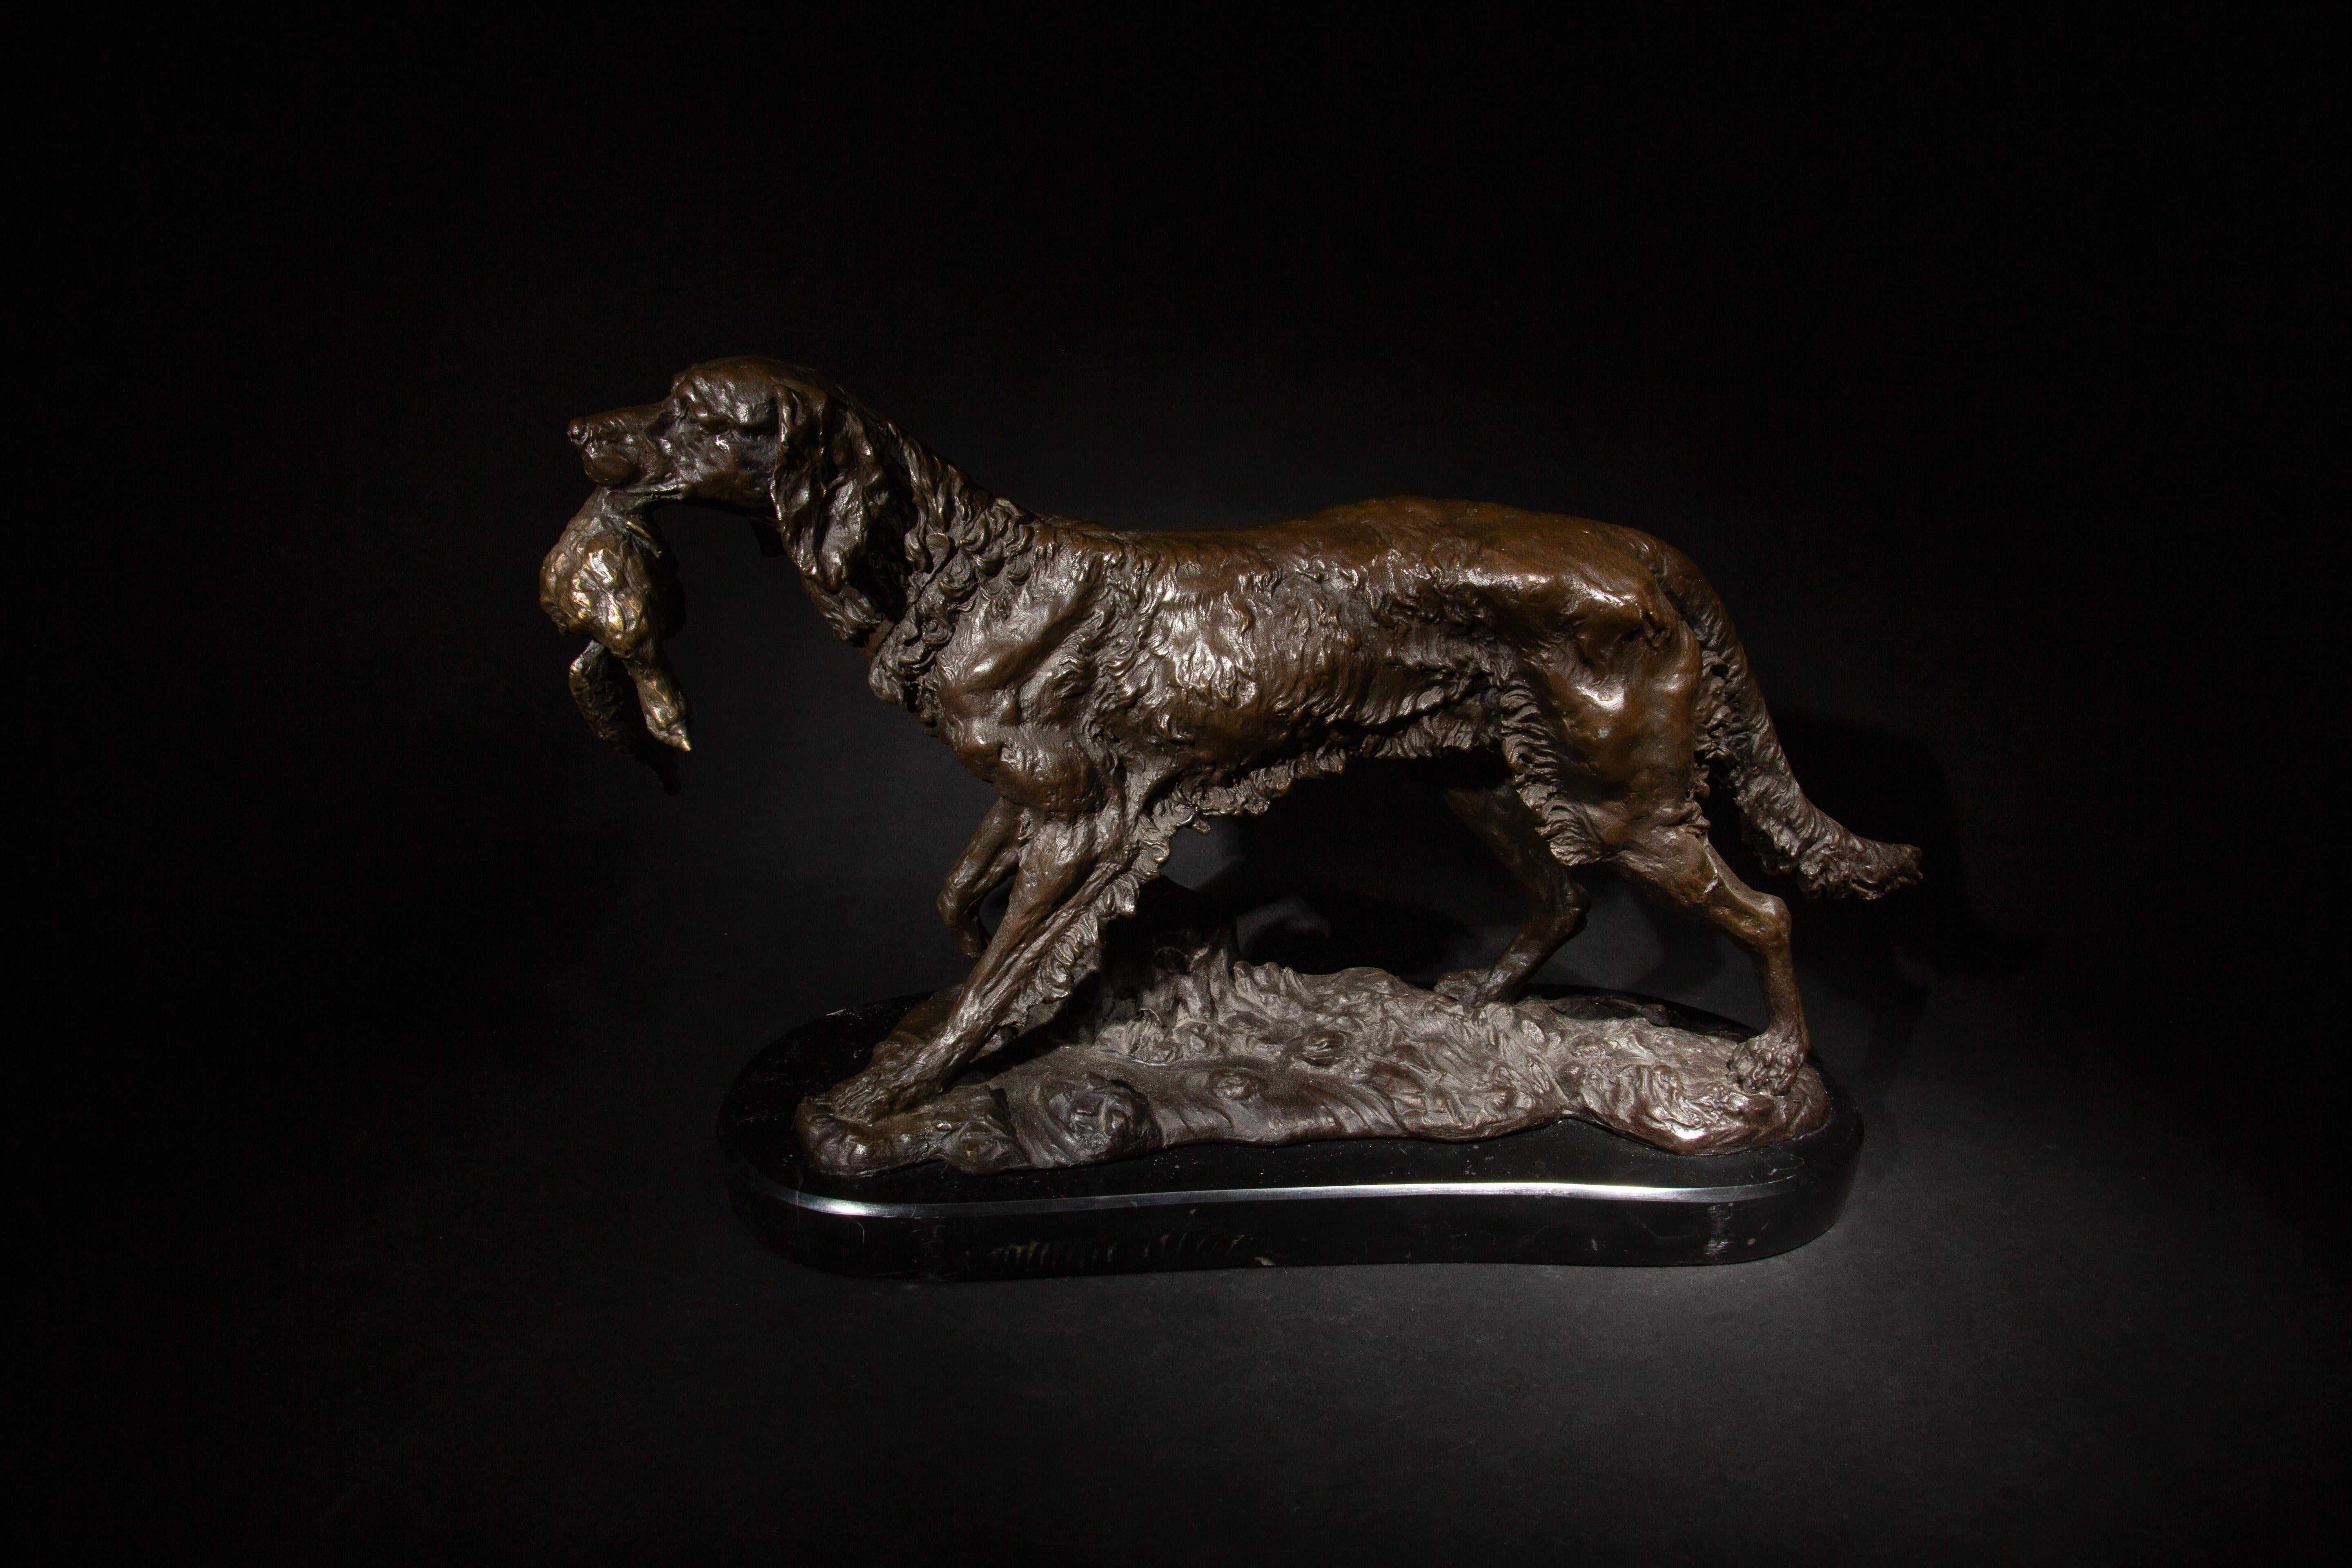 Crafted by the skilled hands of Louis-Albert Carvin, a renowned French artist celebrated for his bronze animalier sculptures, this striking 19th-century masterpiece captures the essence of a hunting dog with a pheasant. Measuring 7 inches high, 17